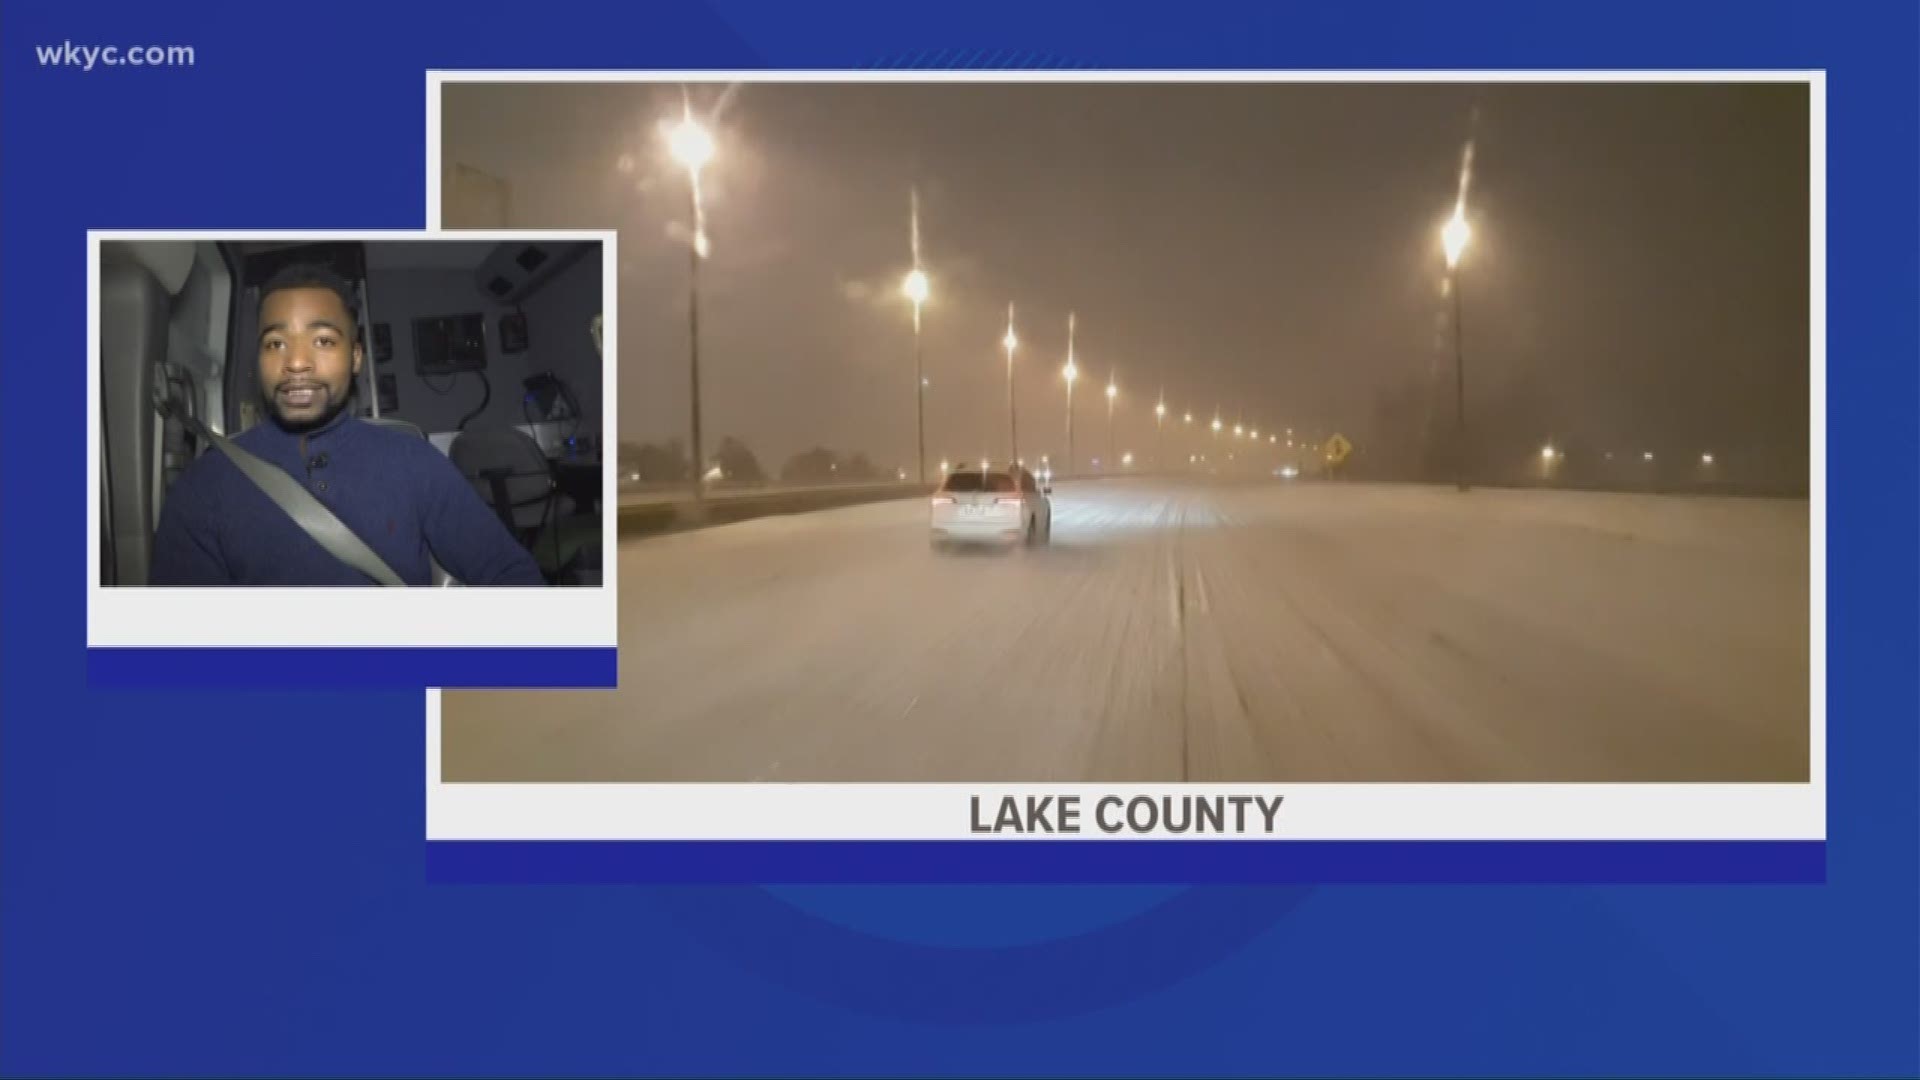 Rugged road conditions on I-90 corridor in Lake and Cuyahoga County